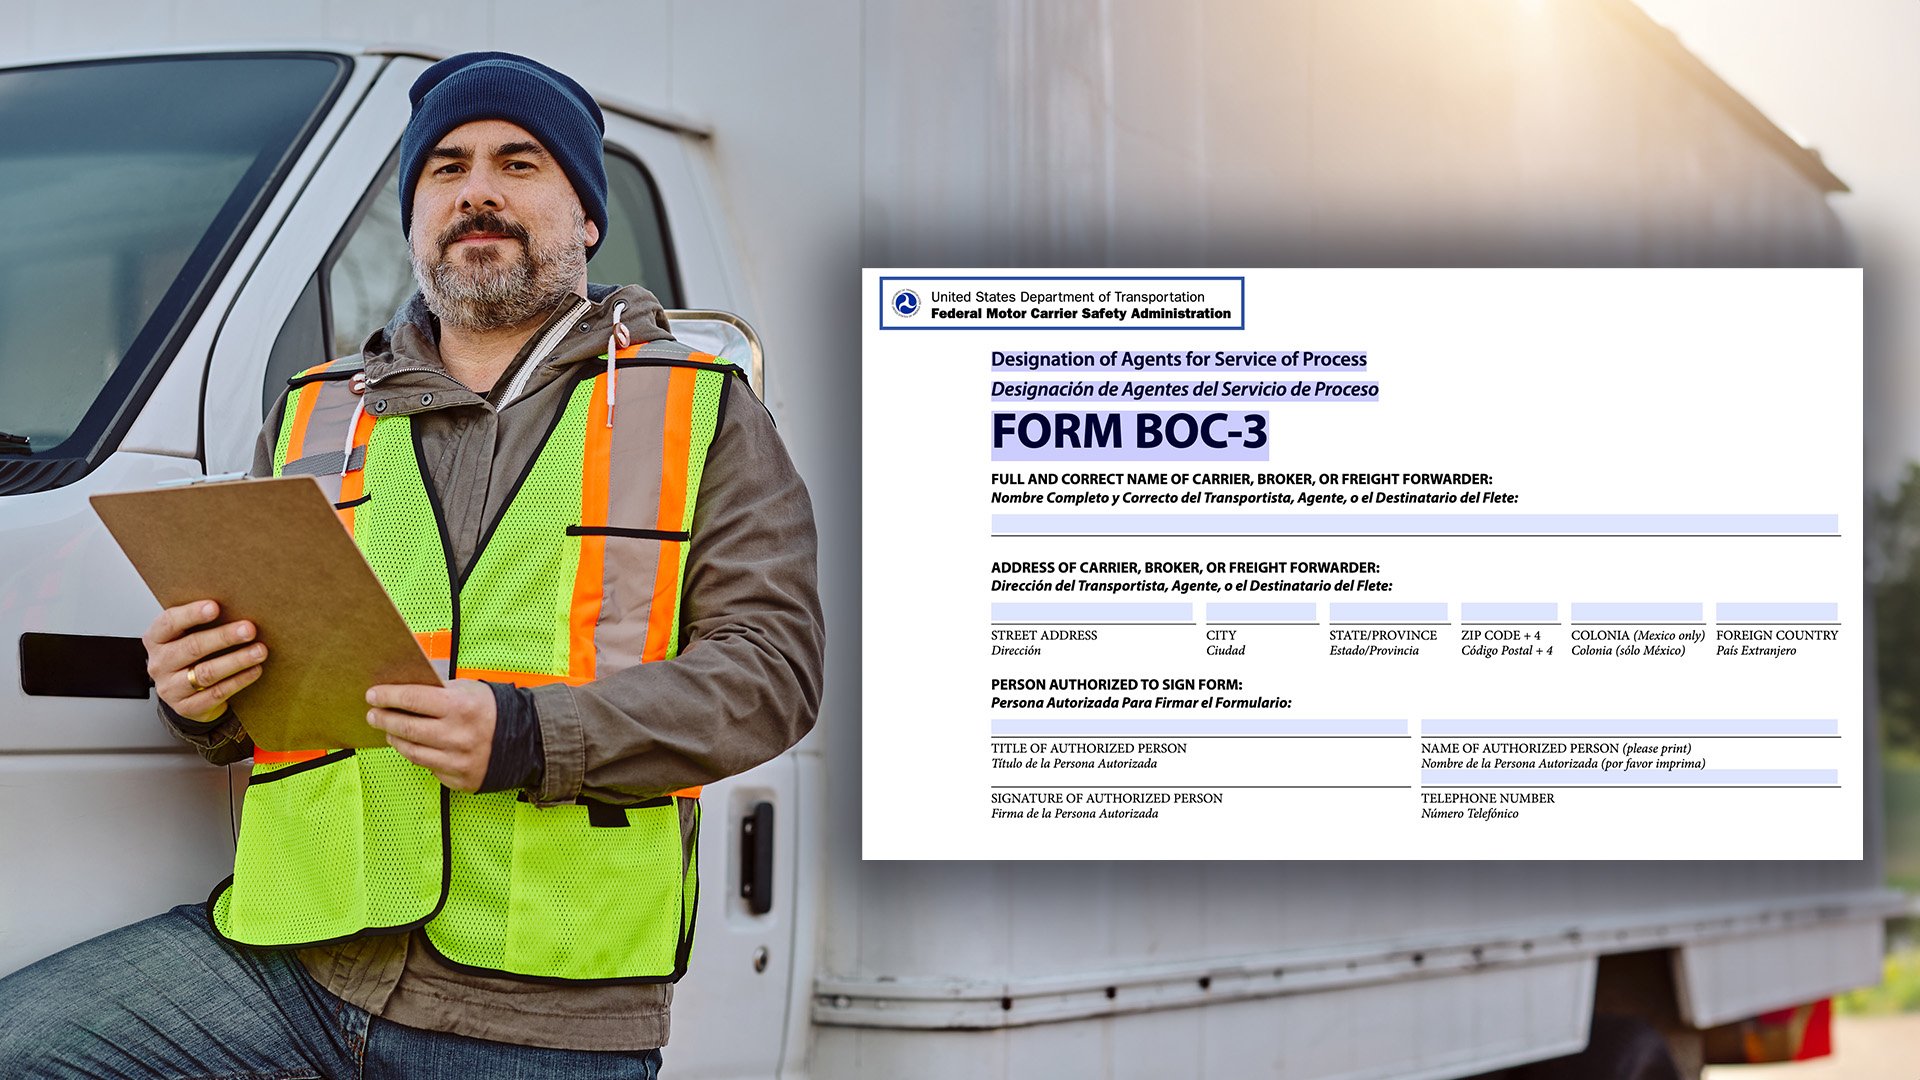 BOC-3 Filing Made Simple: A Step-by-Step Guide for Transportation